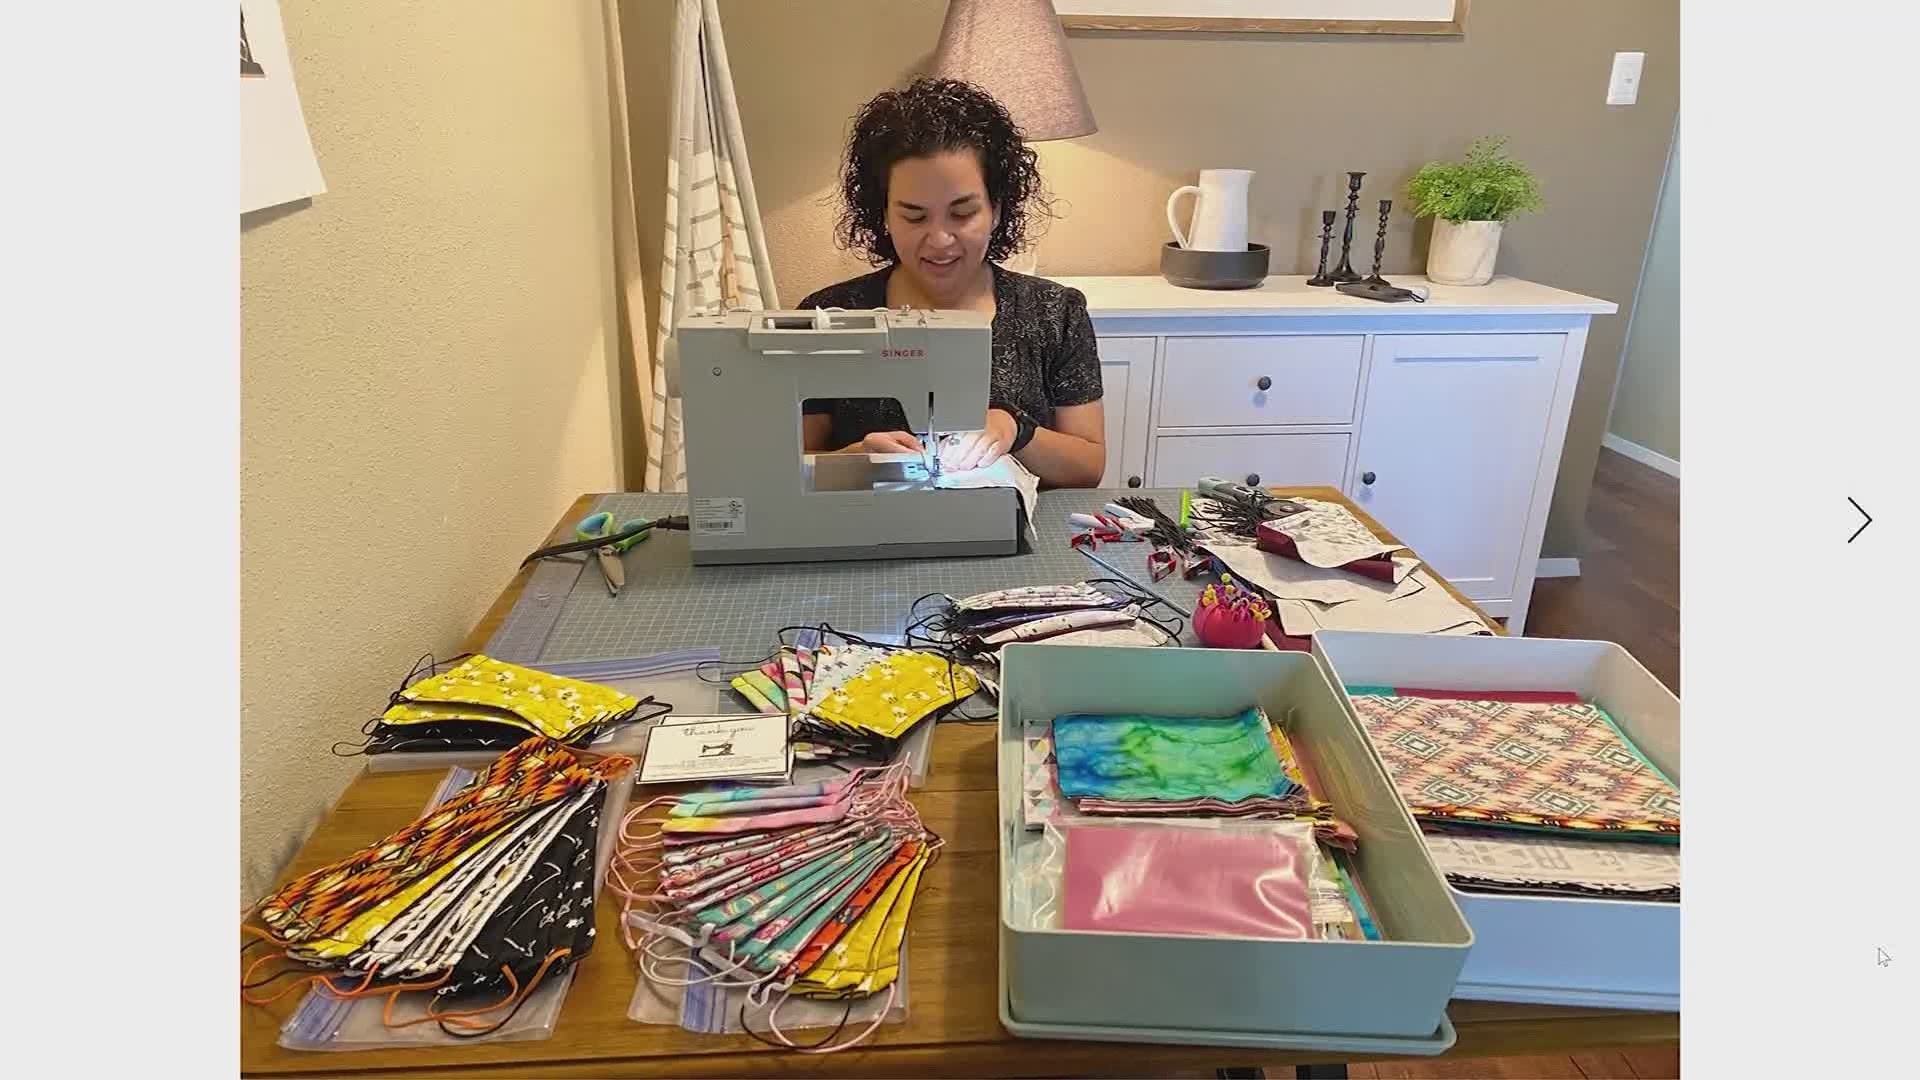 Jennifer Bland needs help with hard-to-find items to disinfect her classroom. After failing to find supplies on her own, she's using Nextdoor to exchange goods.